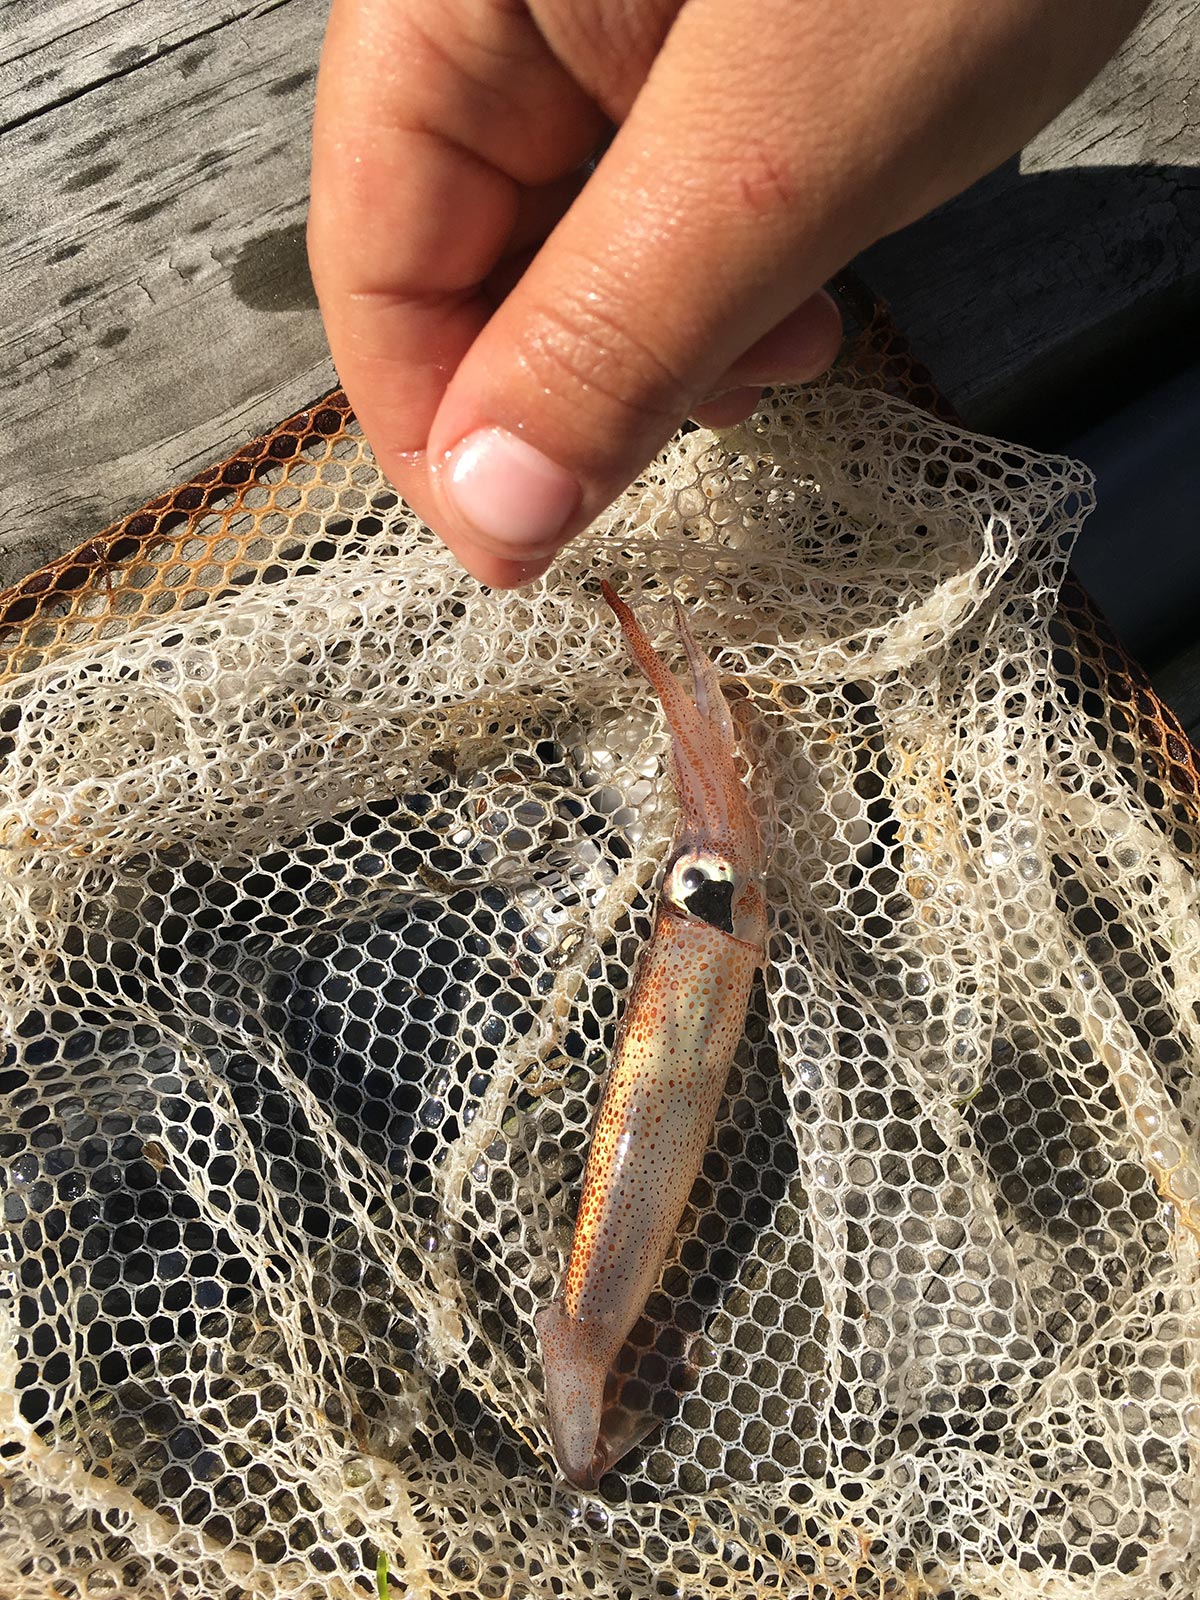 When squid show up on the screen or along the waterline, be prepared to switch to match the hatch